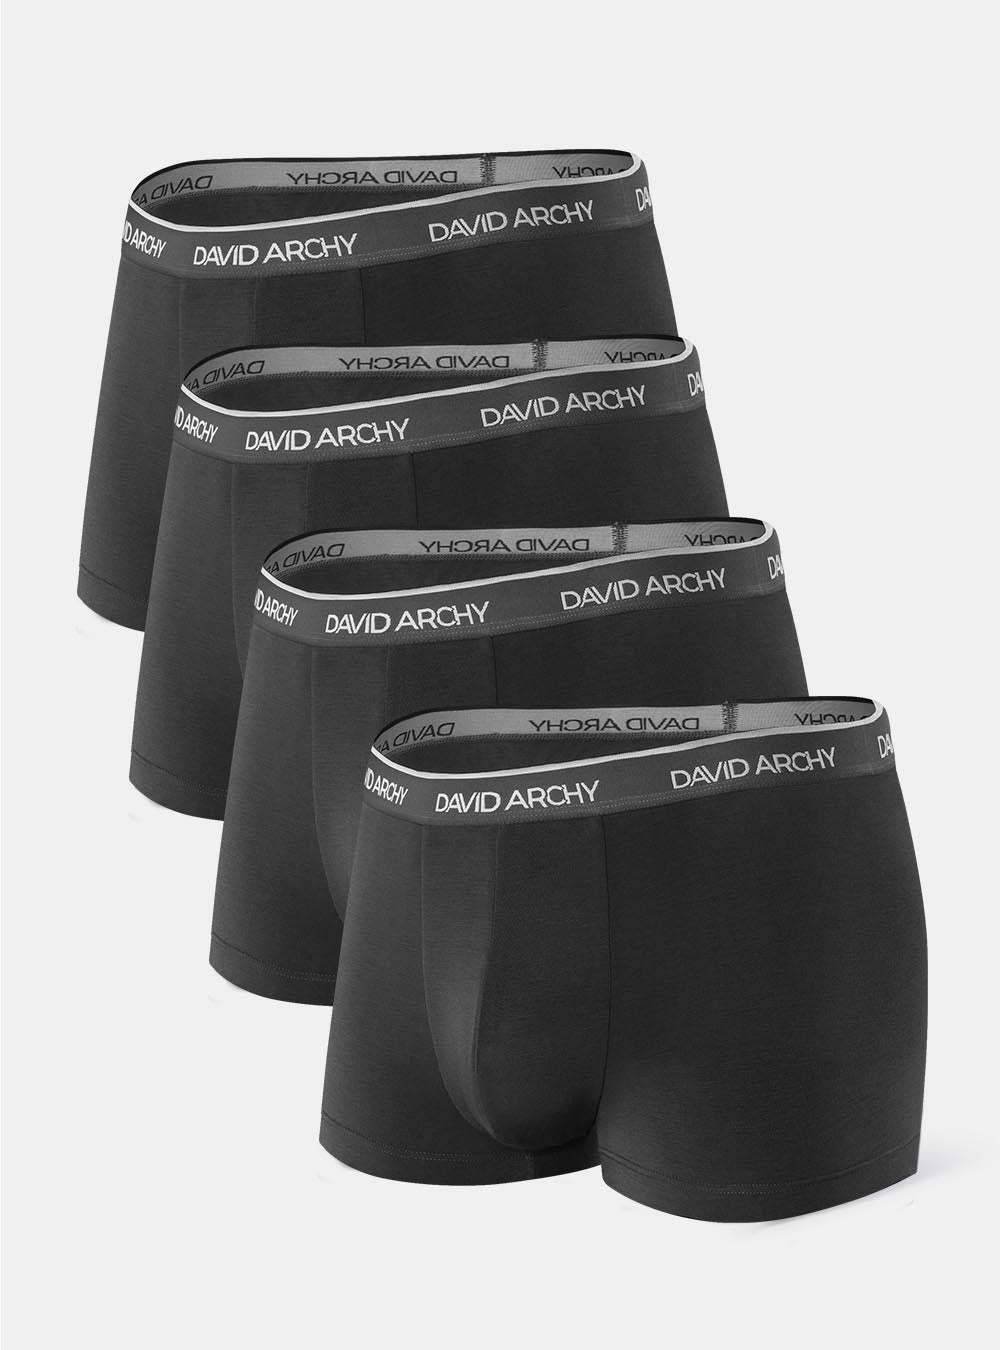 4 Packs Bamboo Trunks 3D Pouch Smooth David Archy Ultra Soft Smooth  Breathable Contour